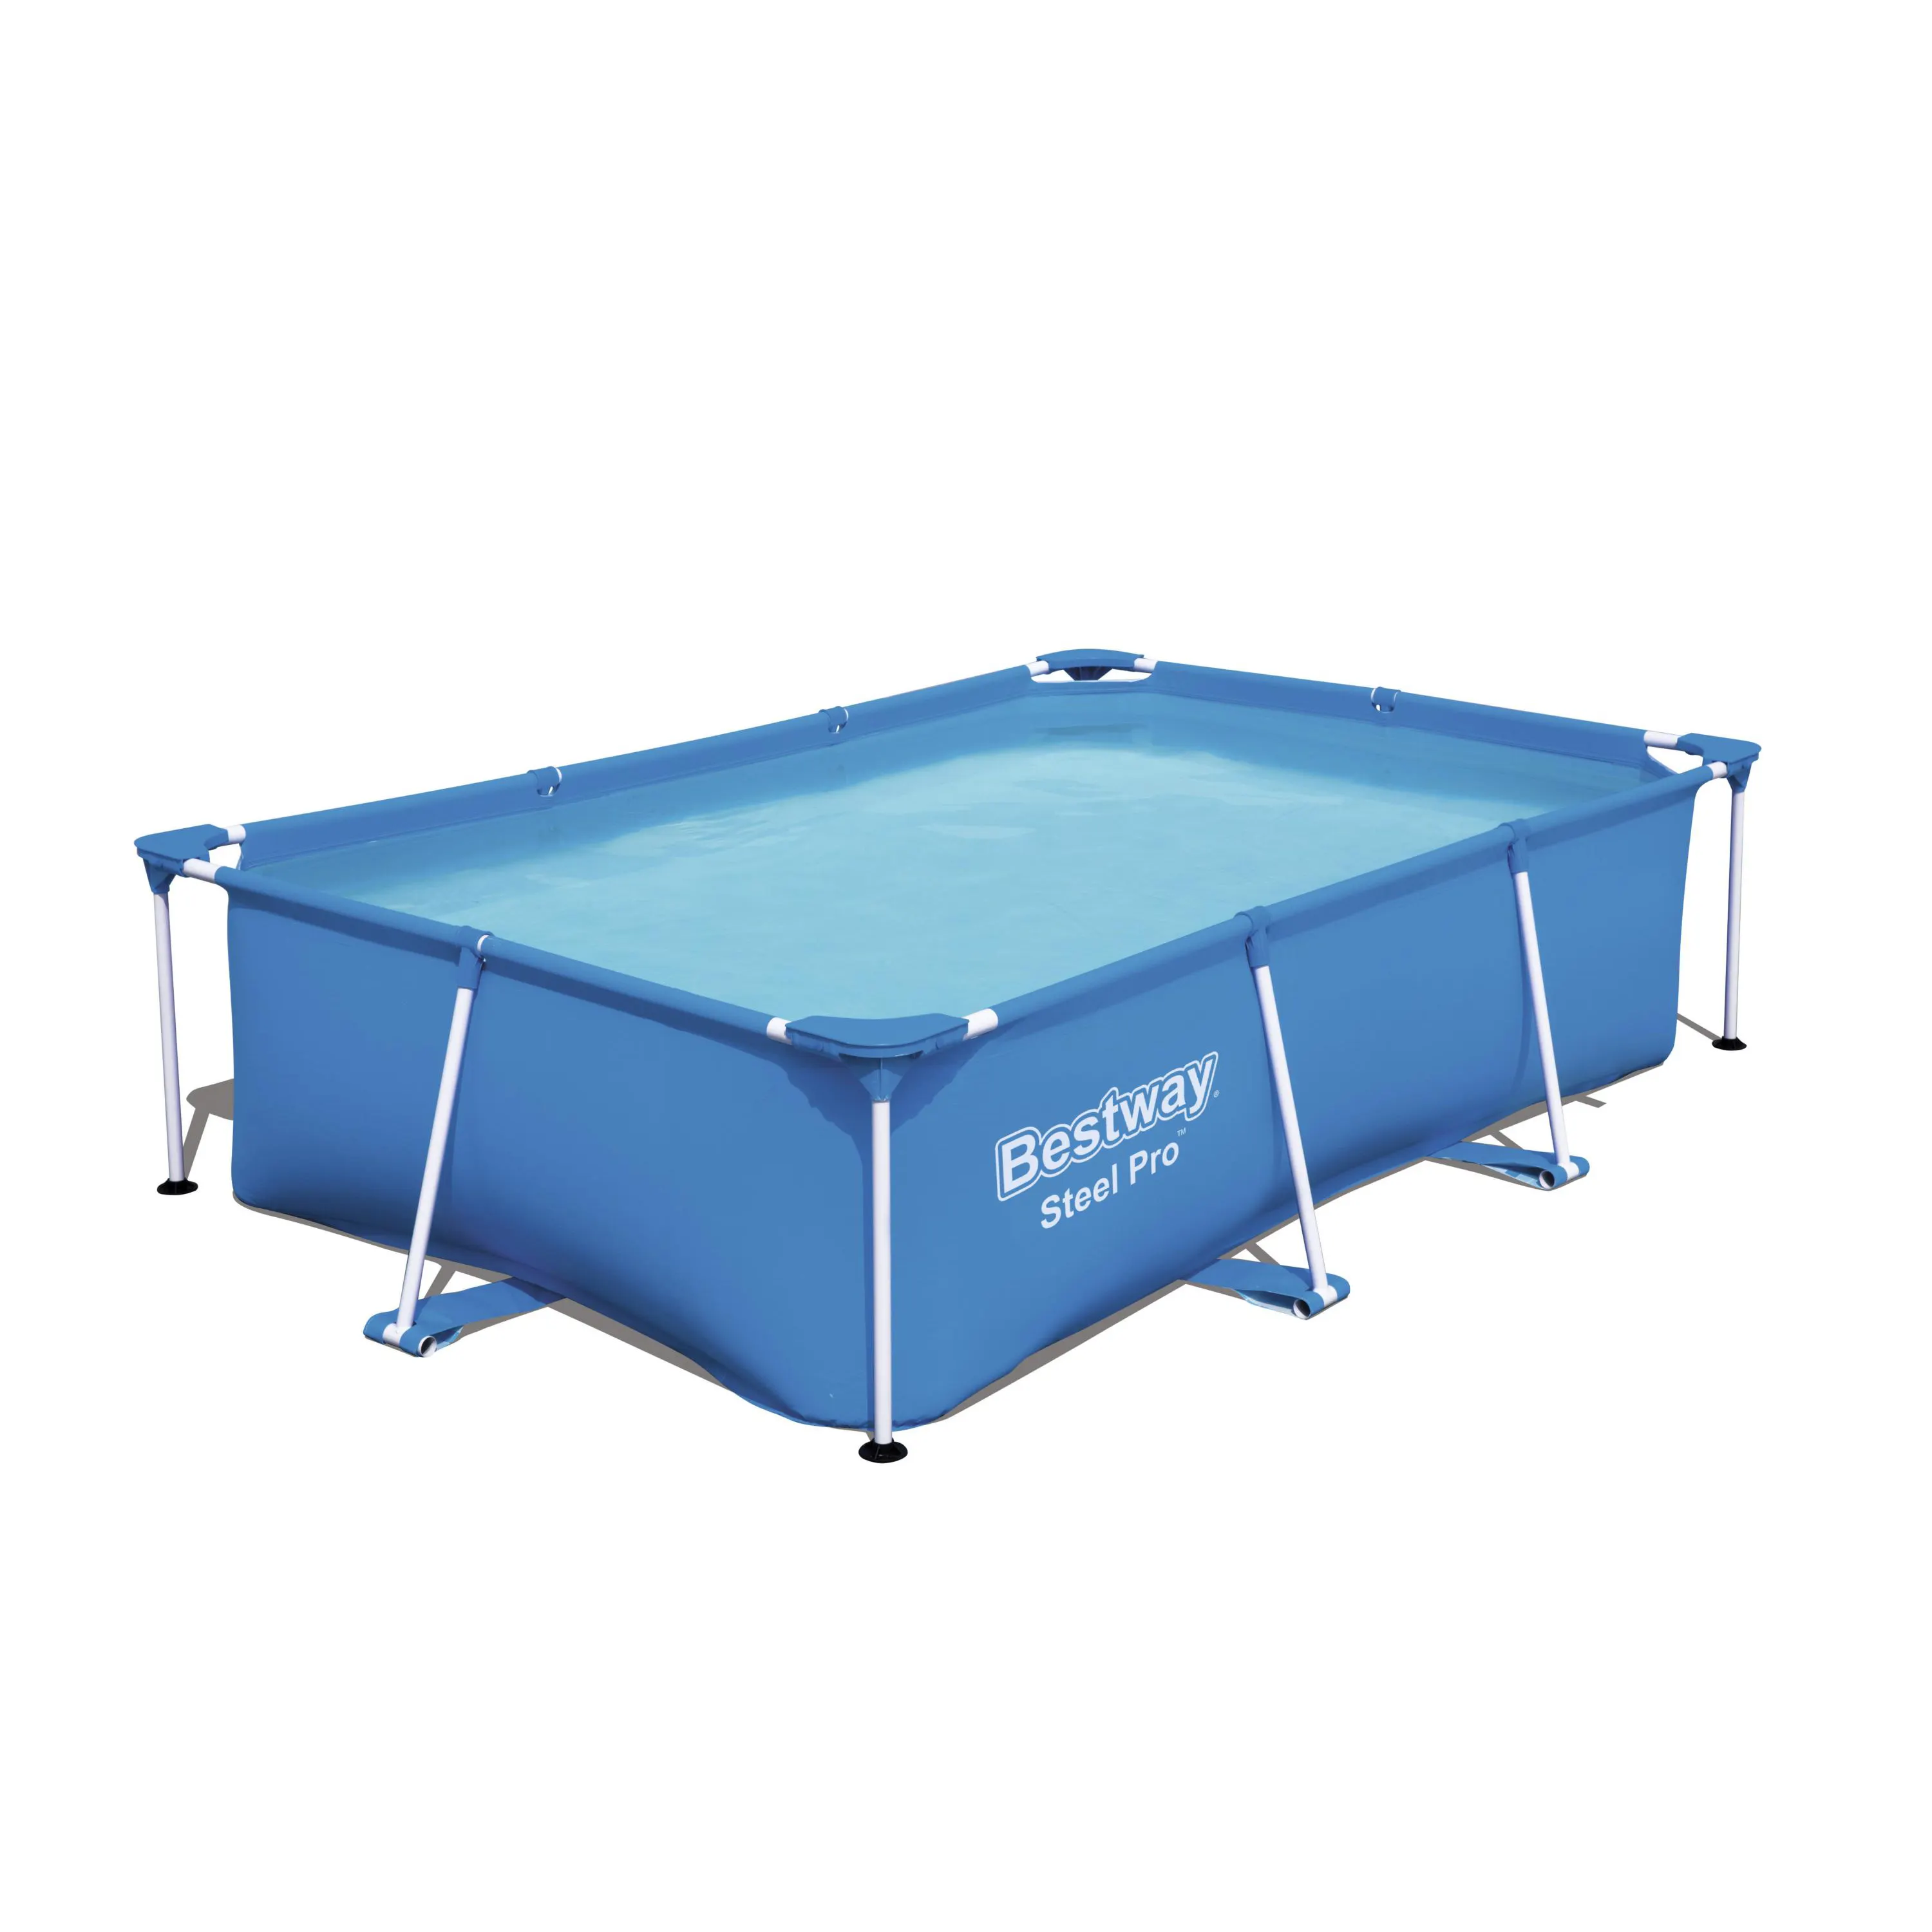 Best way 56403 popular PVC outdoor swimming pool for adults and children in Europe and America